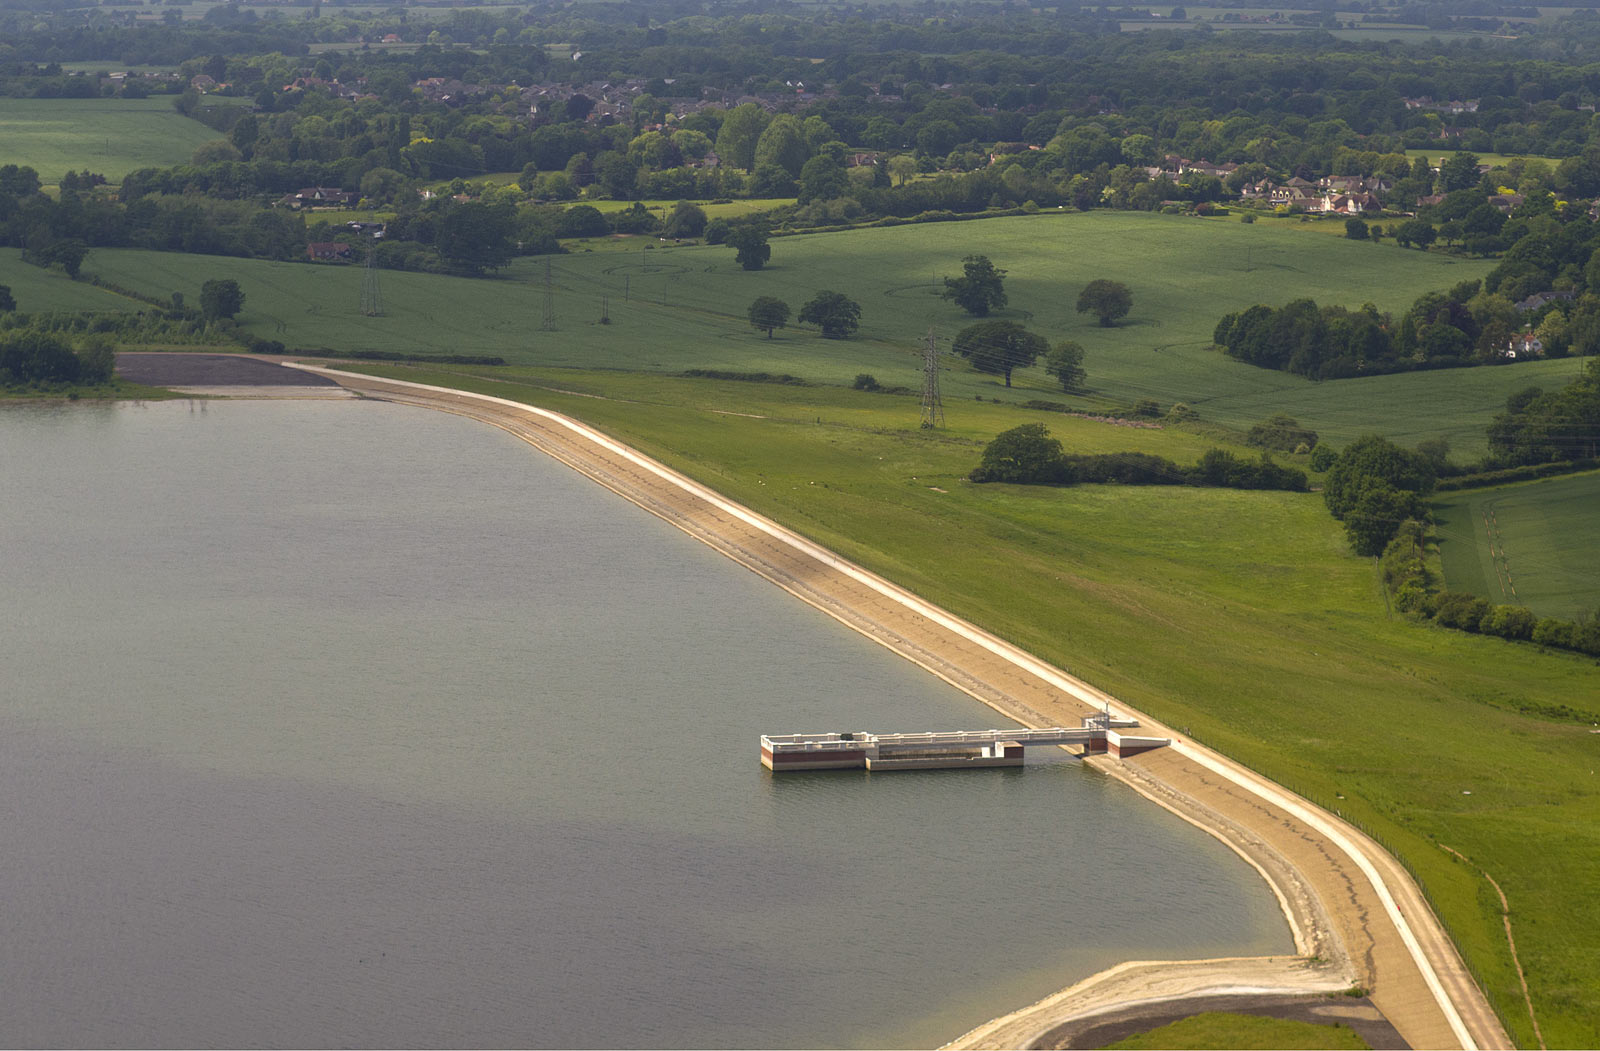 Aerial photograph of reservoir dam showing the whole structure and surrounding countryside